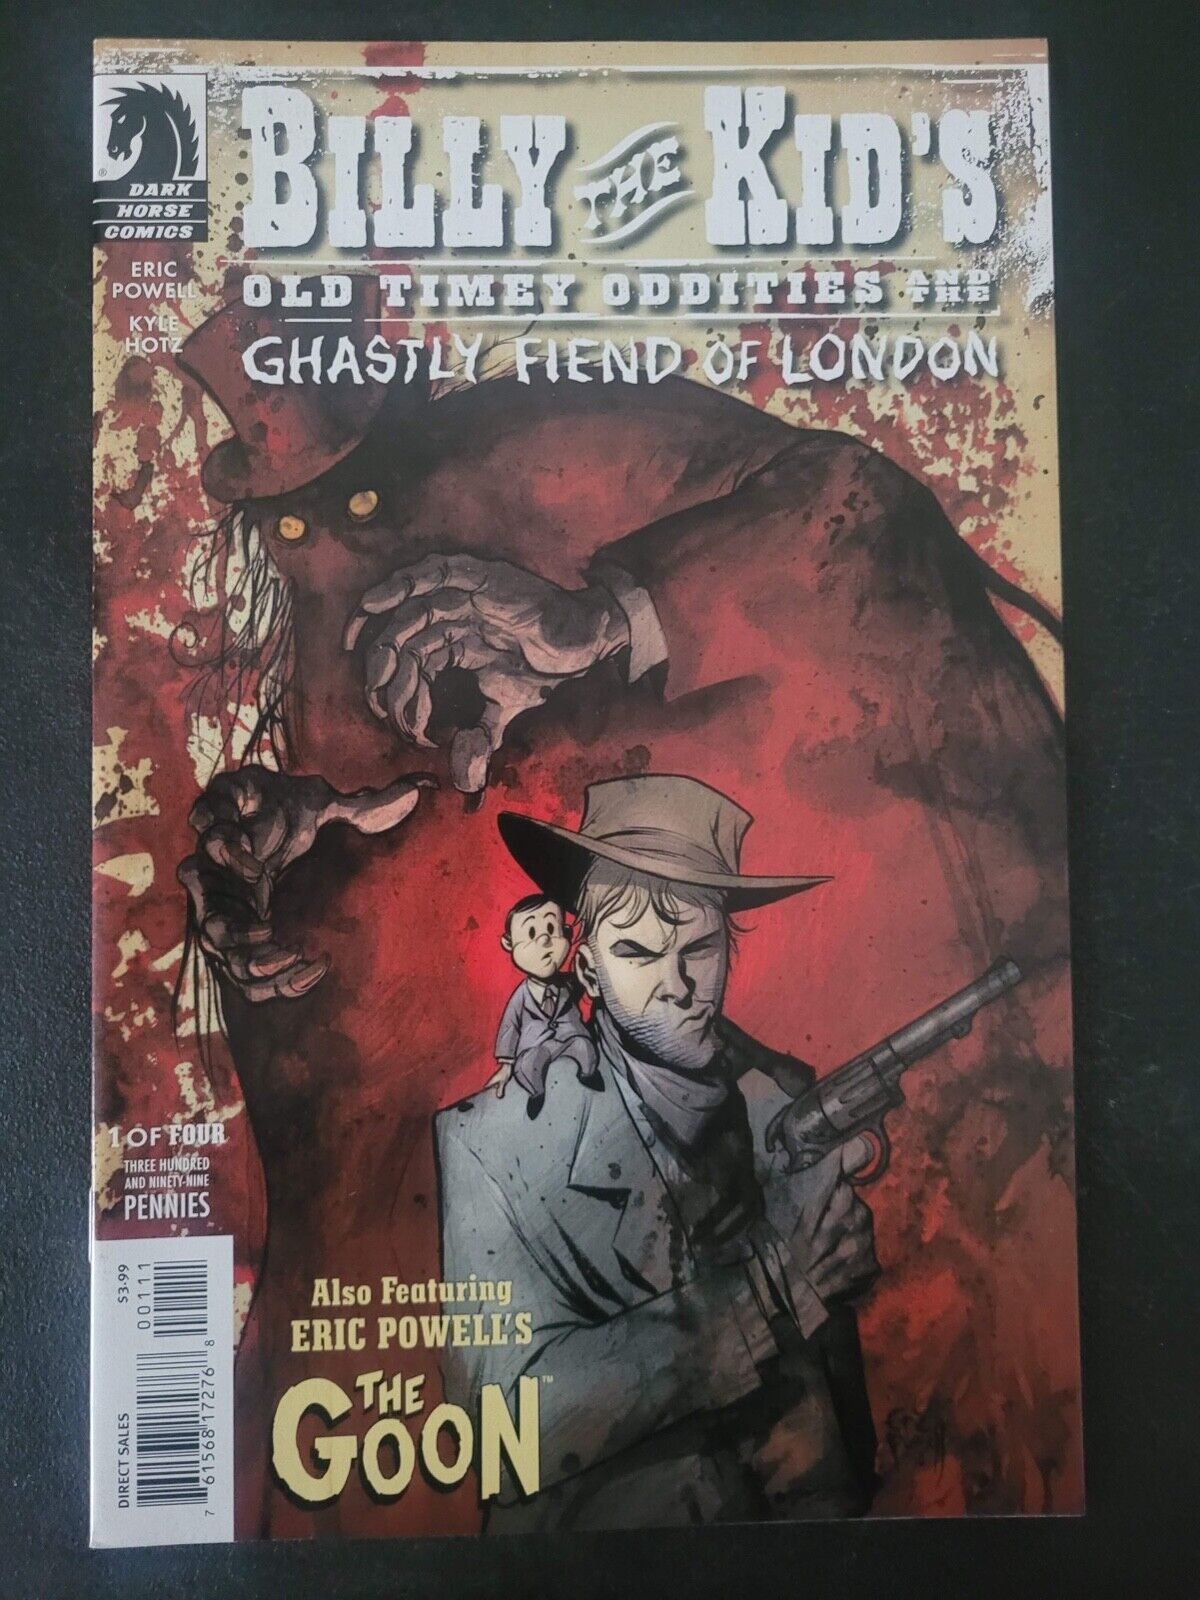 BILLY THE KID'S OLD TIMEY ODDITIES AND THE GHSTLY FIEND OF LONDON #1 POWELL+